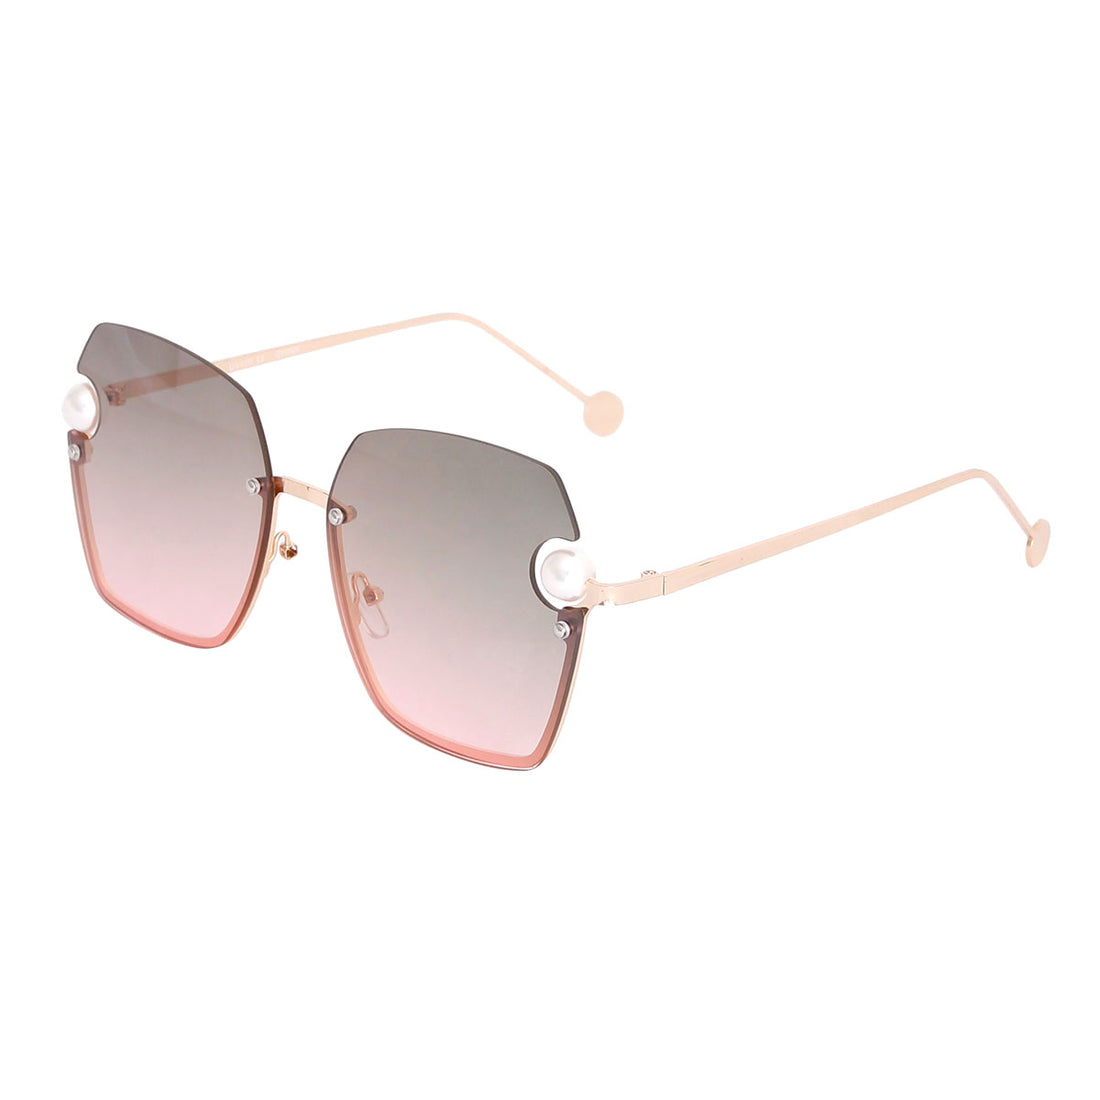 Green to Pink Pearl Sunglasses